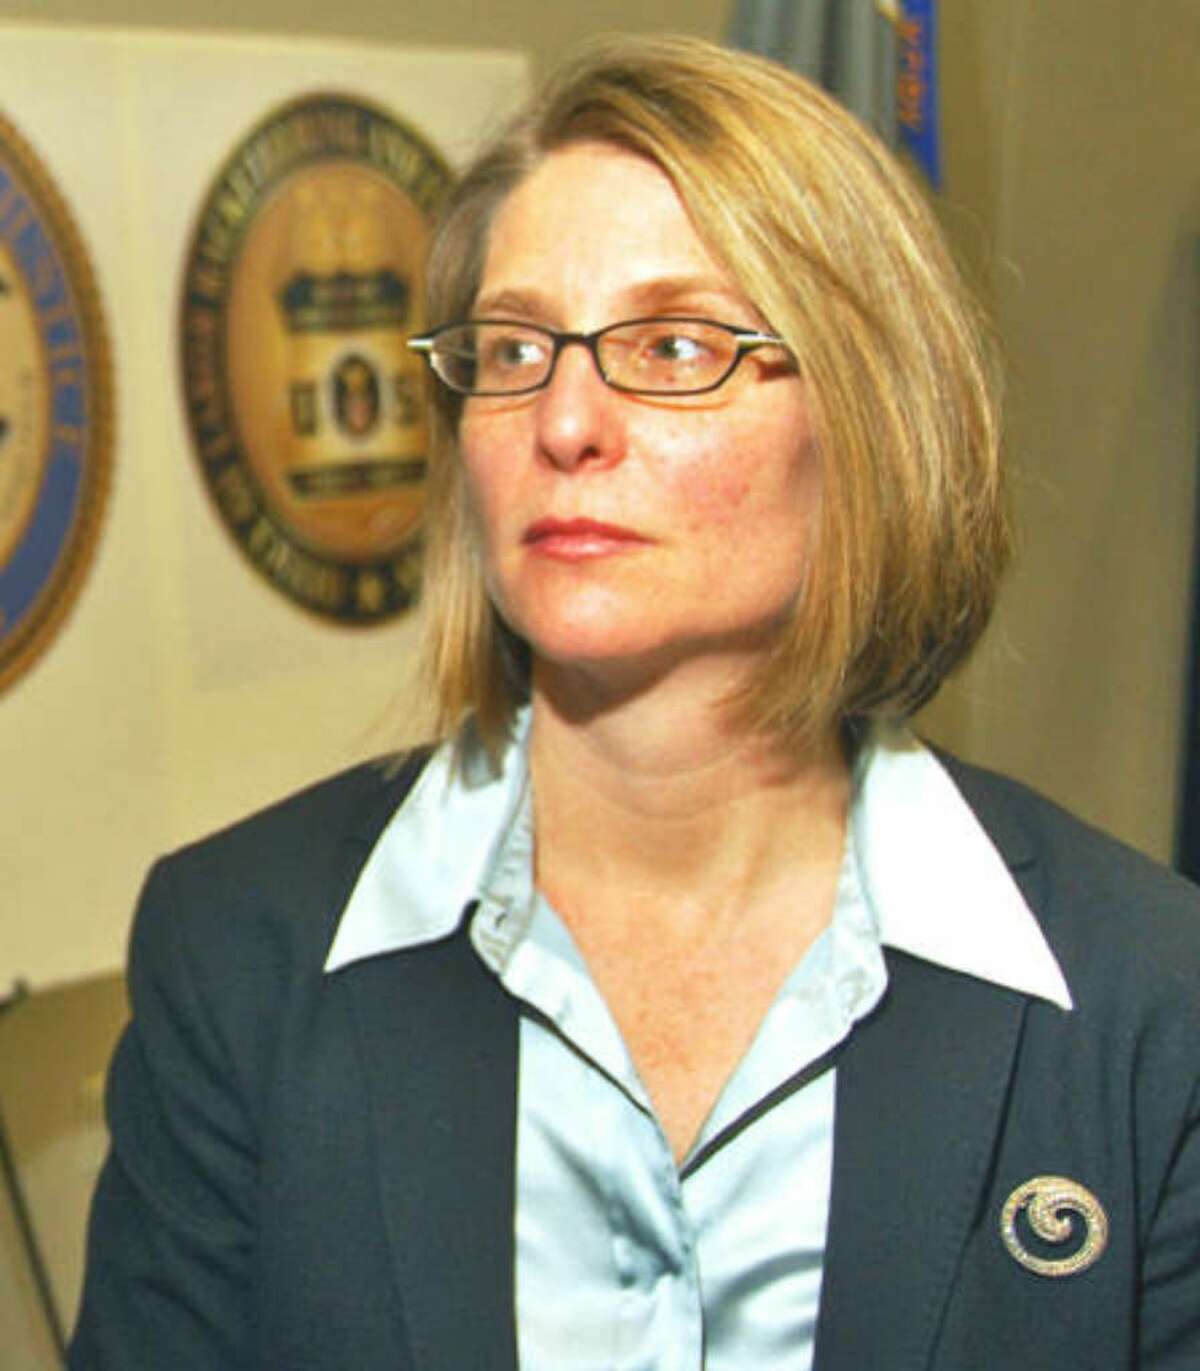 Assistant U.S. attorney Elizabeth Coombe at a news conference on the indictment of Joseph L Bruno at the U.S. Courthouse on Jan. 23, 2009. (John Carl D'Annibale / Times Union)